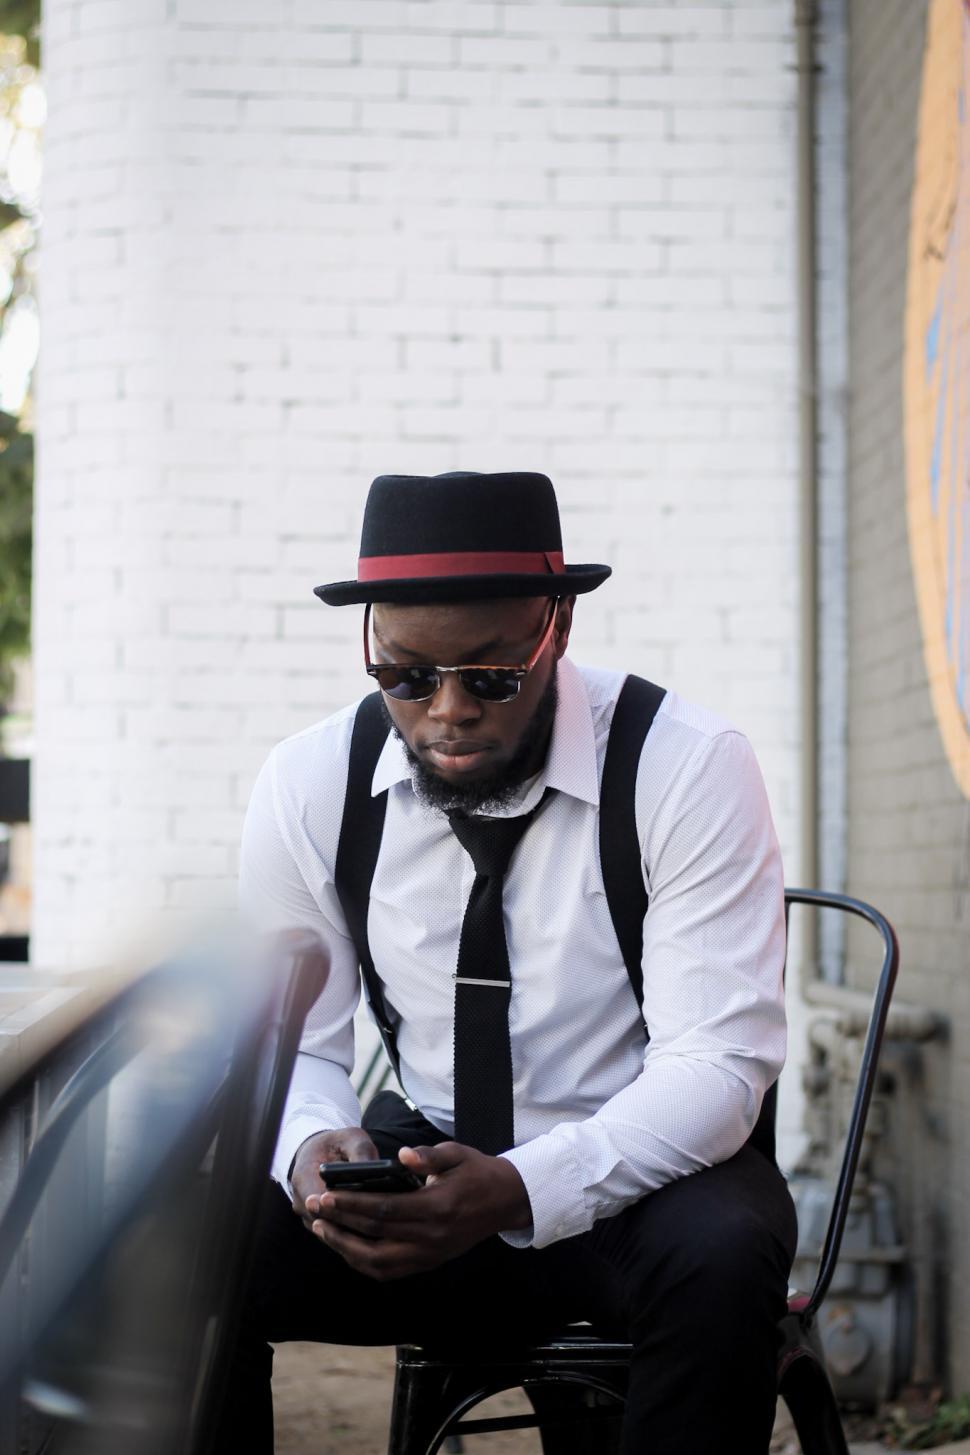 Free Image of Young Man wearing tie and suspenders using cell phone 